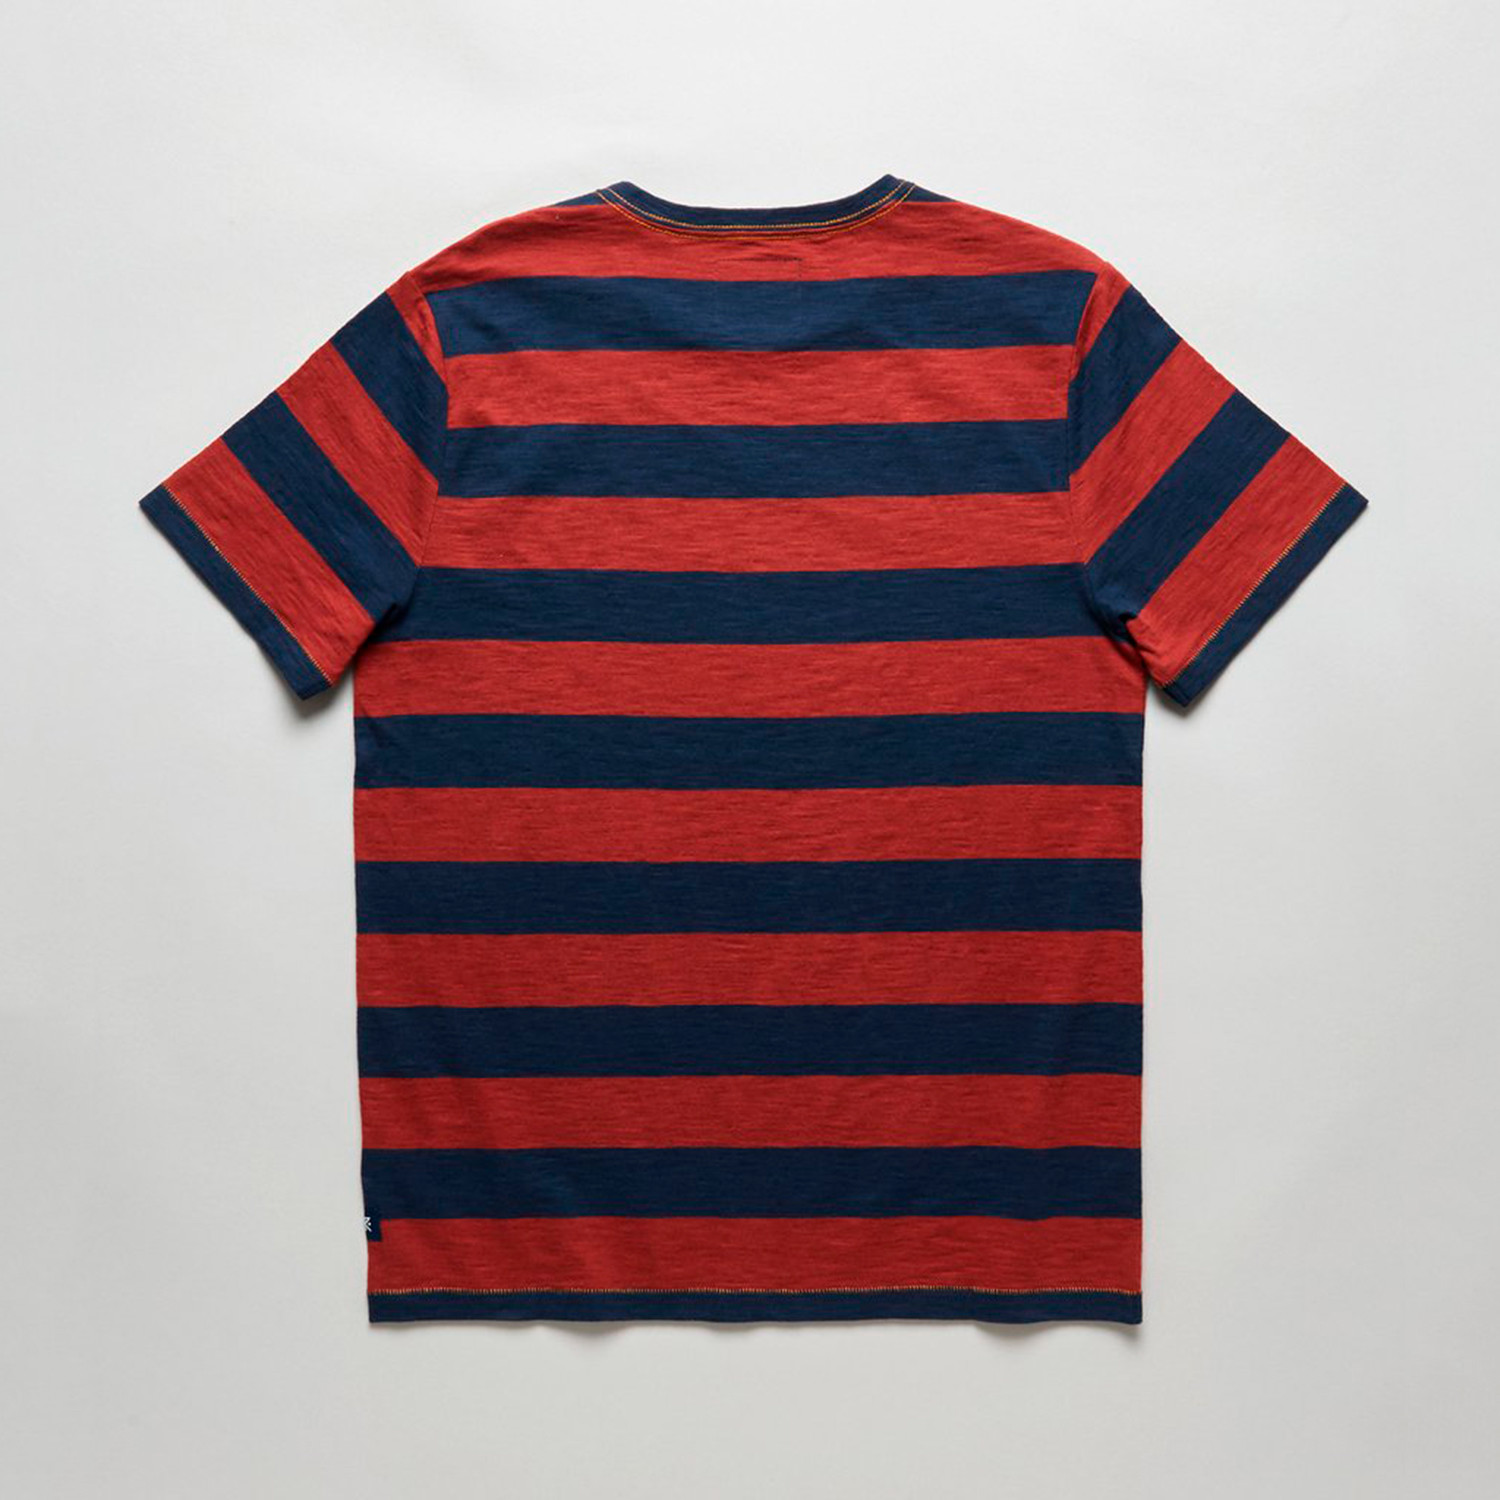 Yorsh Knit Tee // Navy + Red (XL) - WINTER CLEARANCE: Just Shirting ...